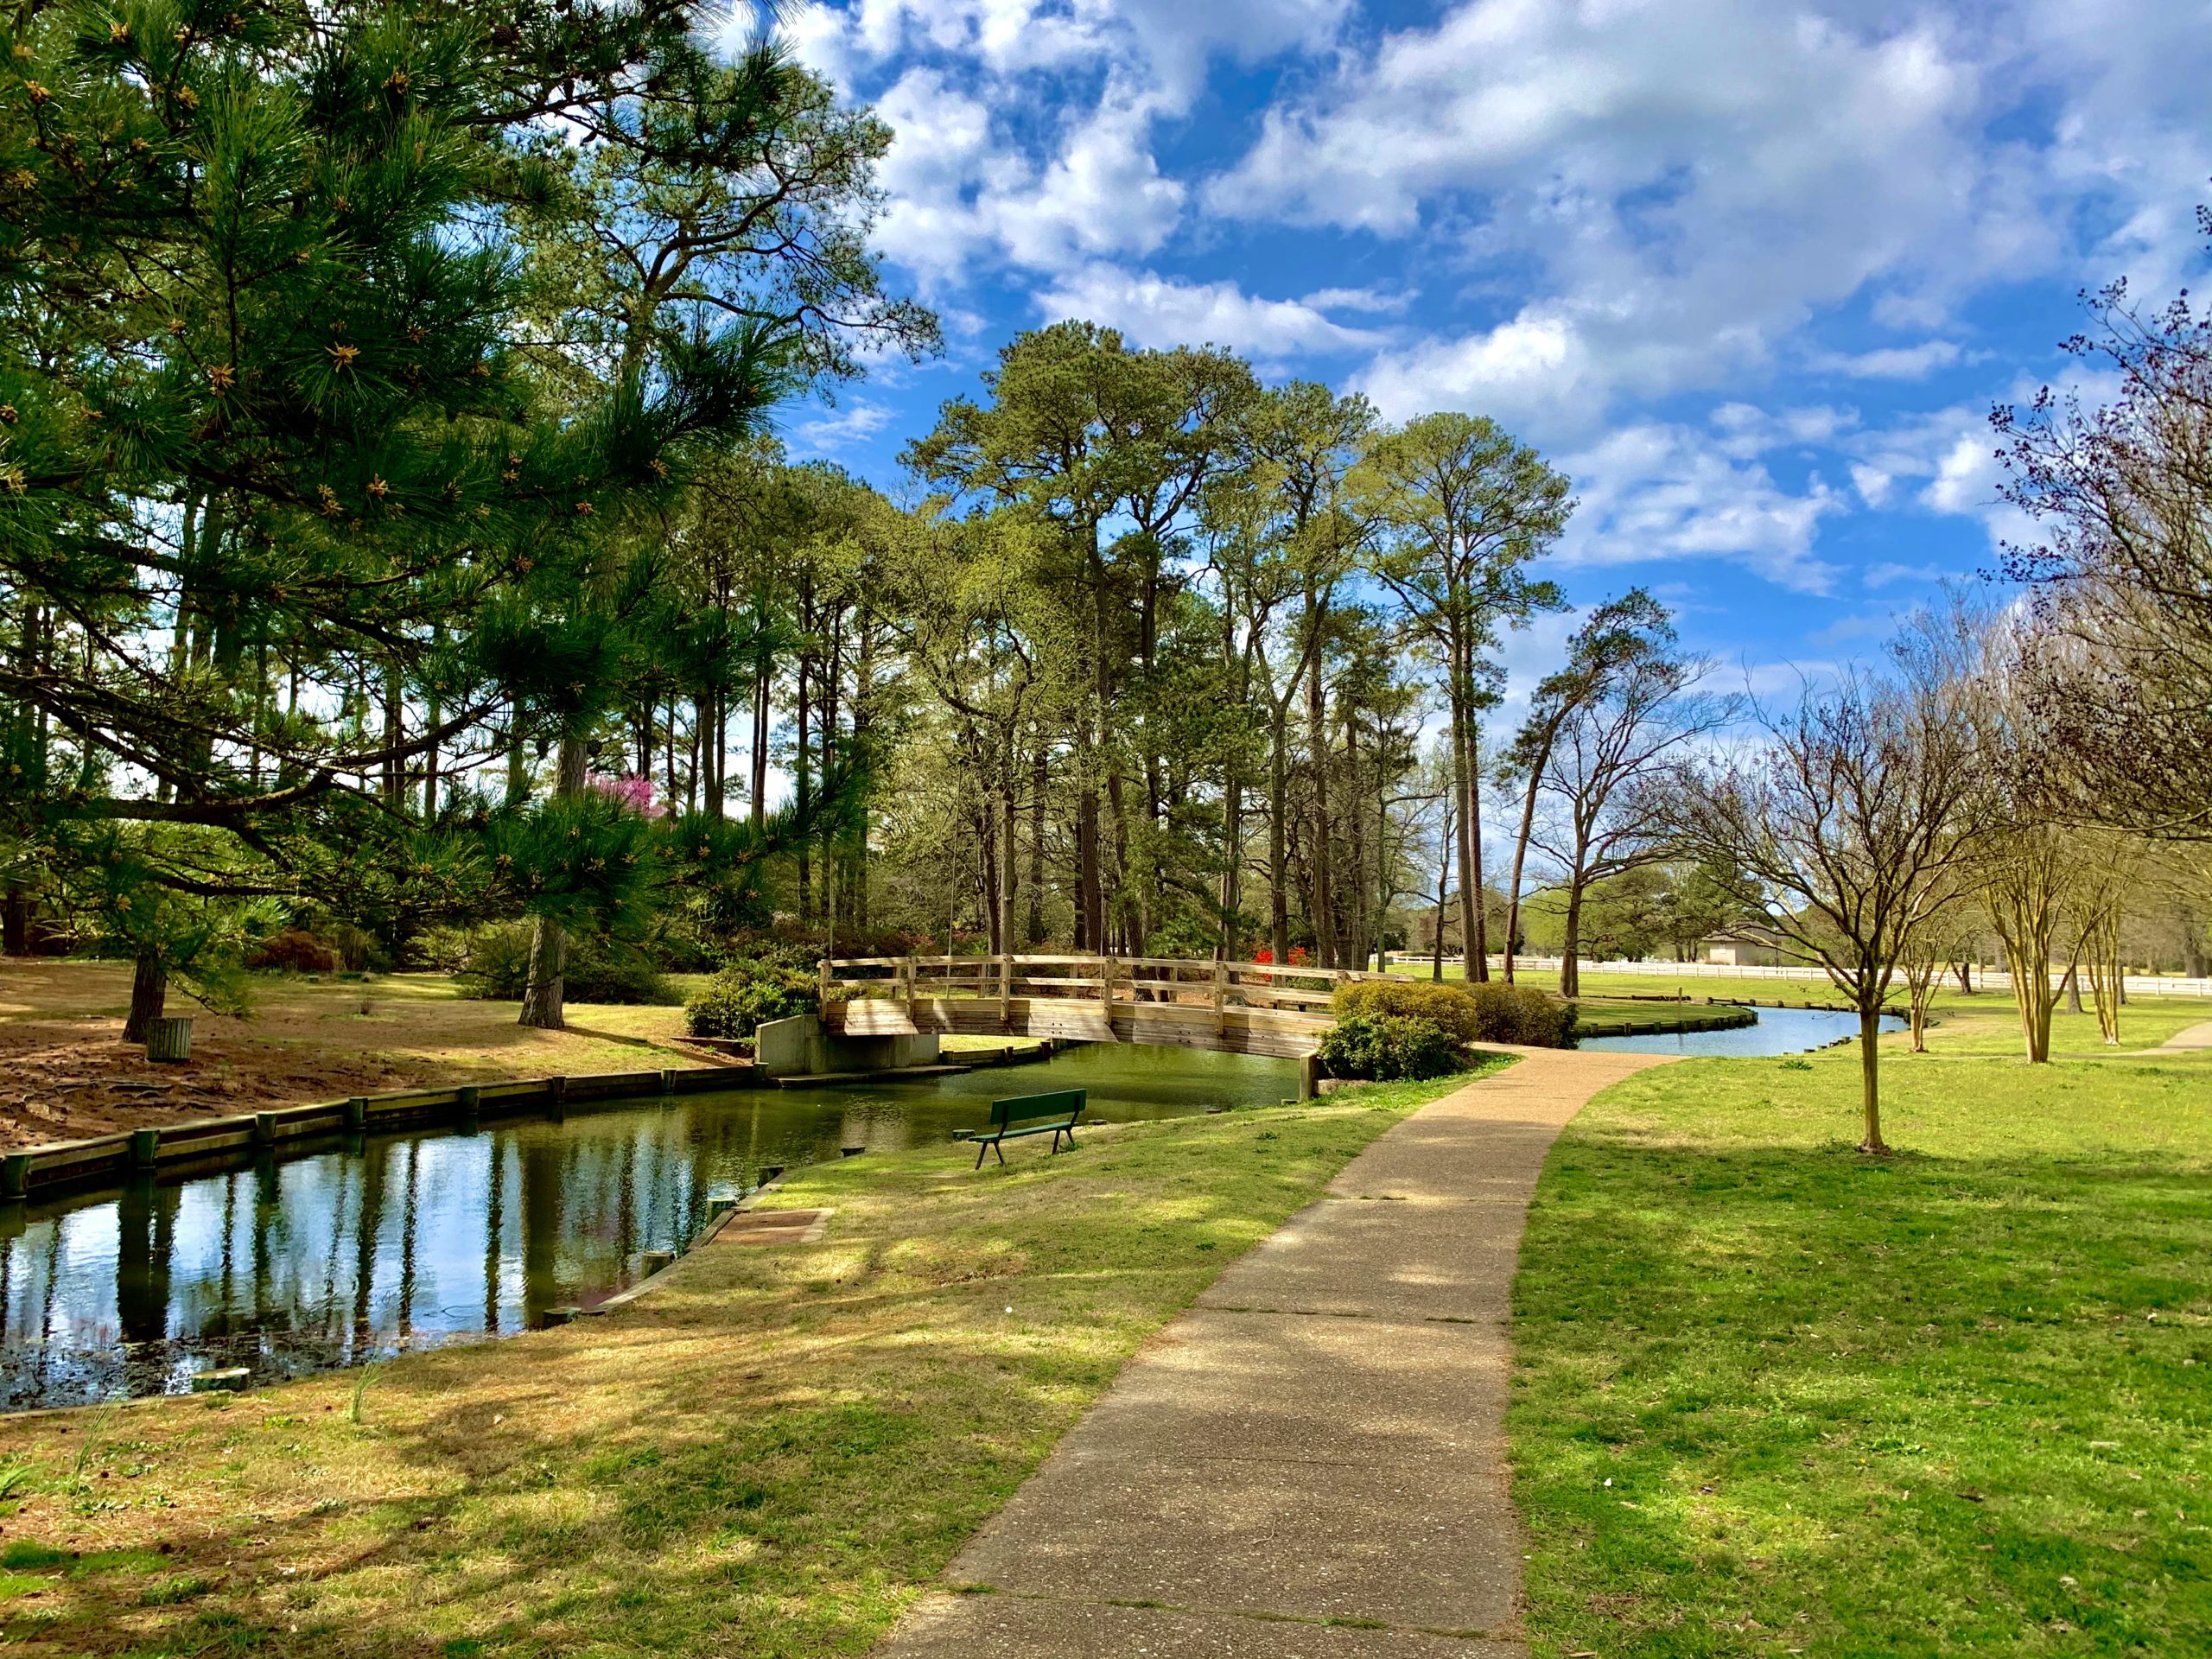 City Park is a nature park in Portsmouth Virginia and includes a perimeter walk through the Friendship Gardens